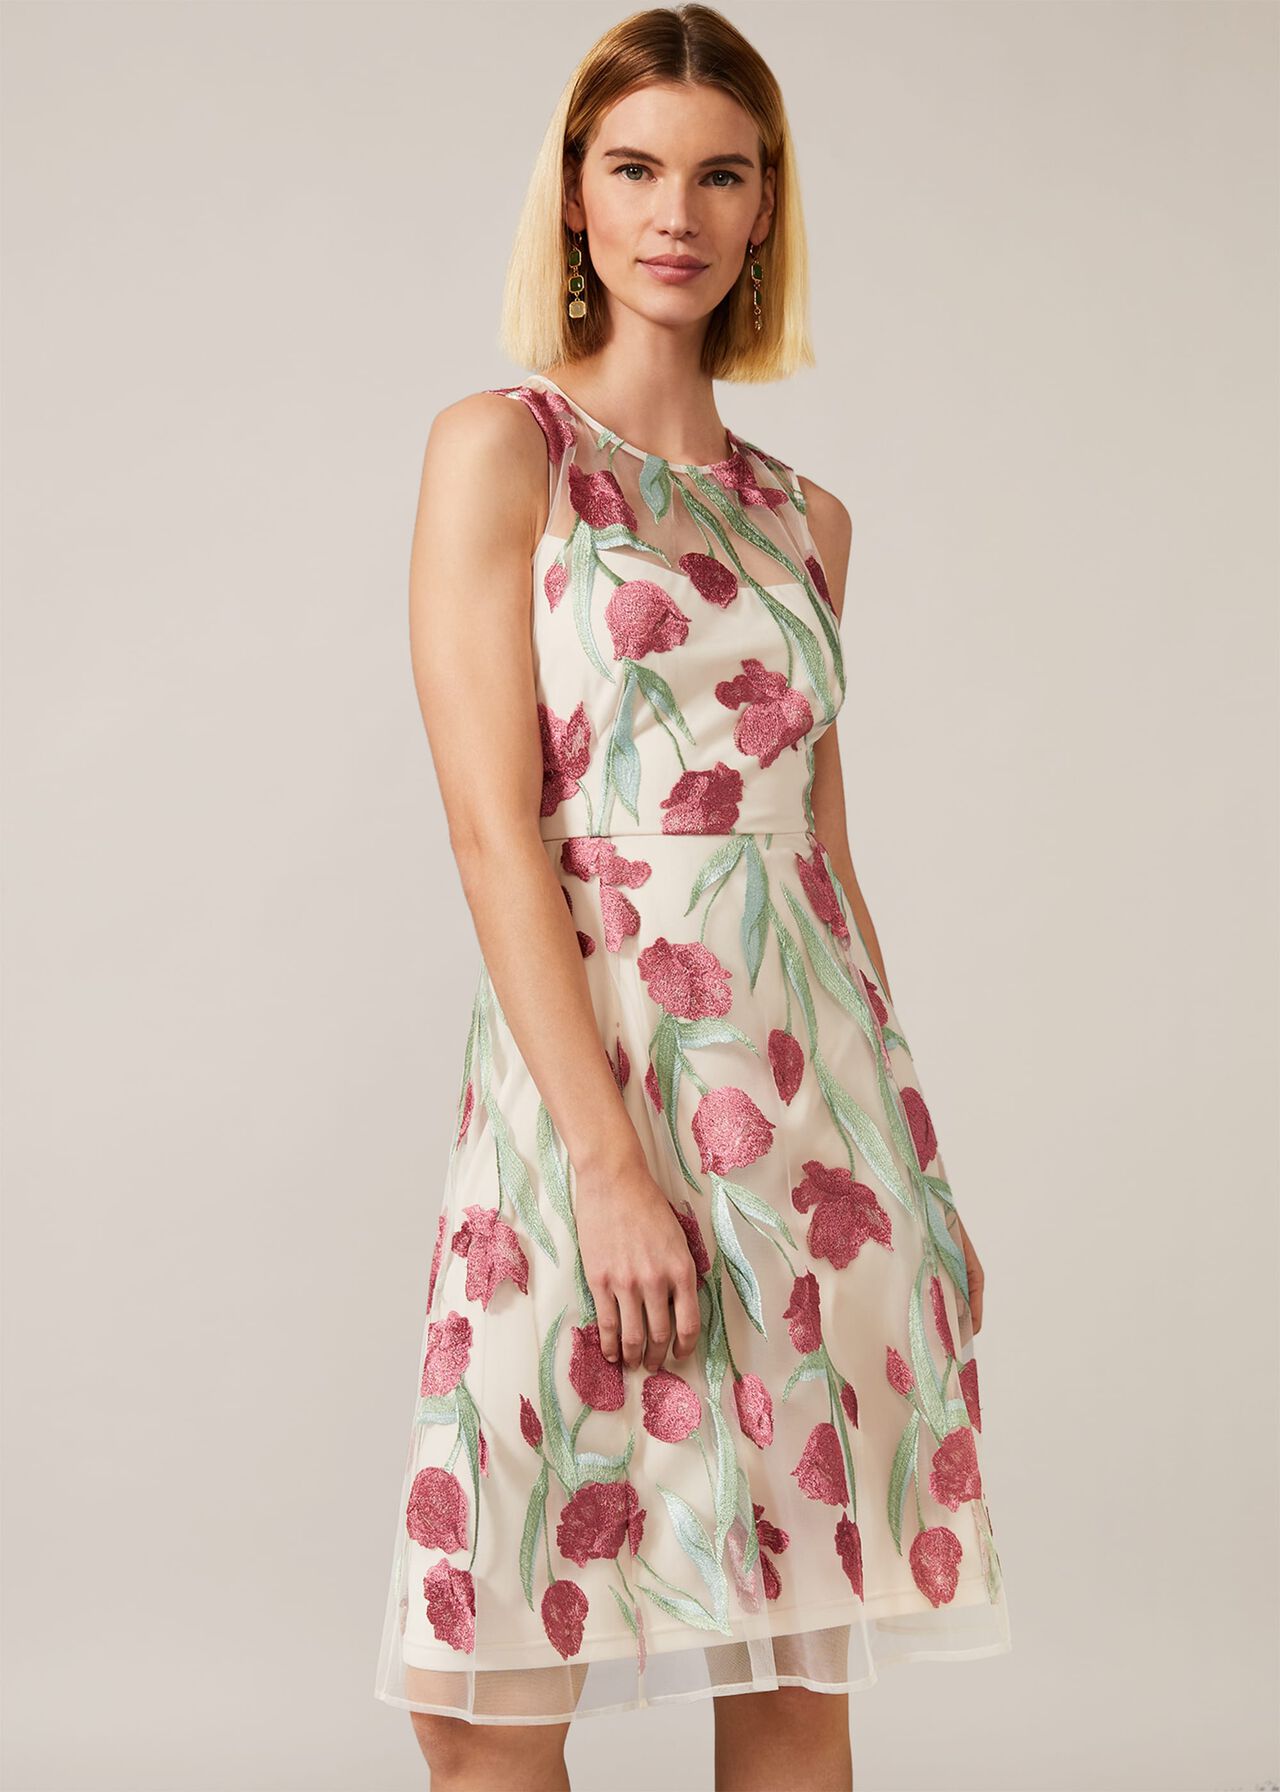 Shae Floral Embroidered Dress | Phase Eight